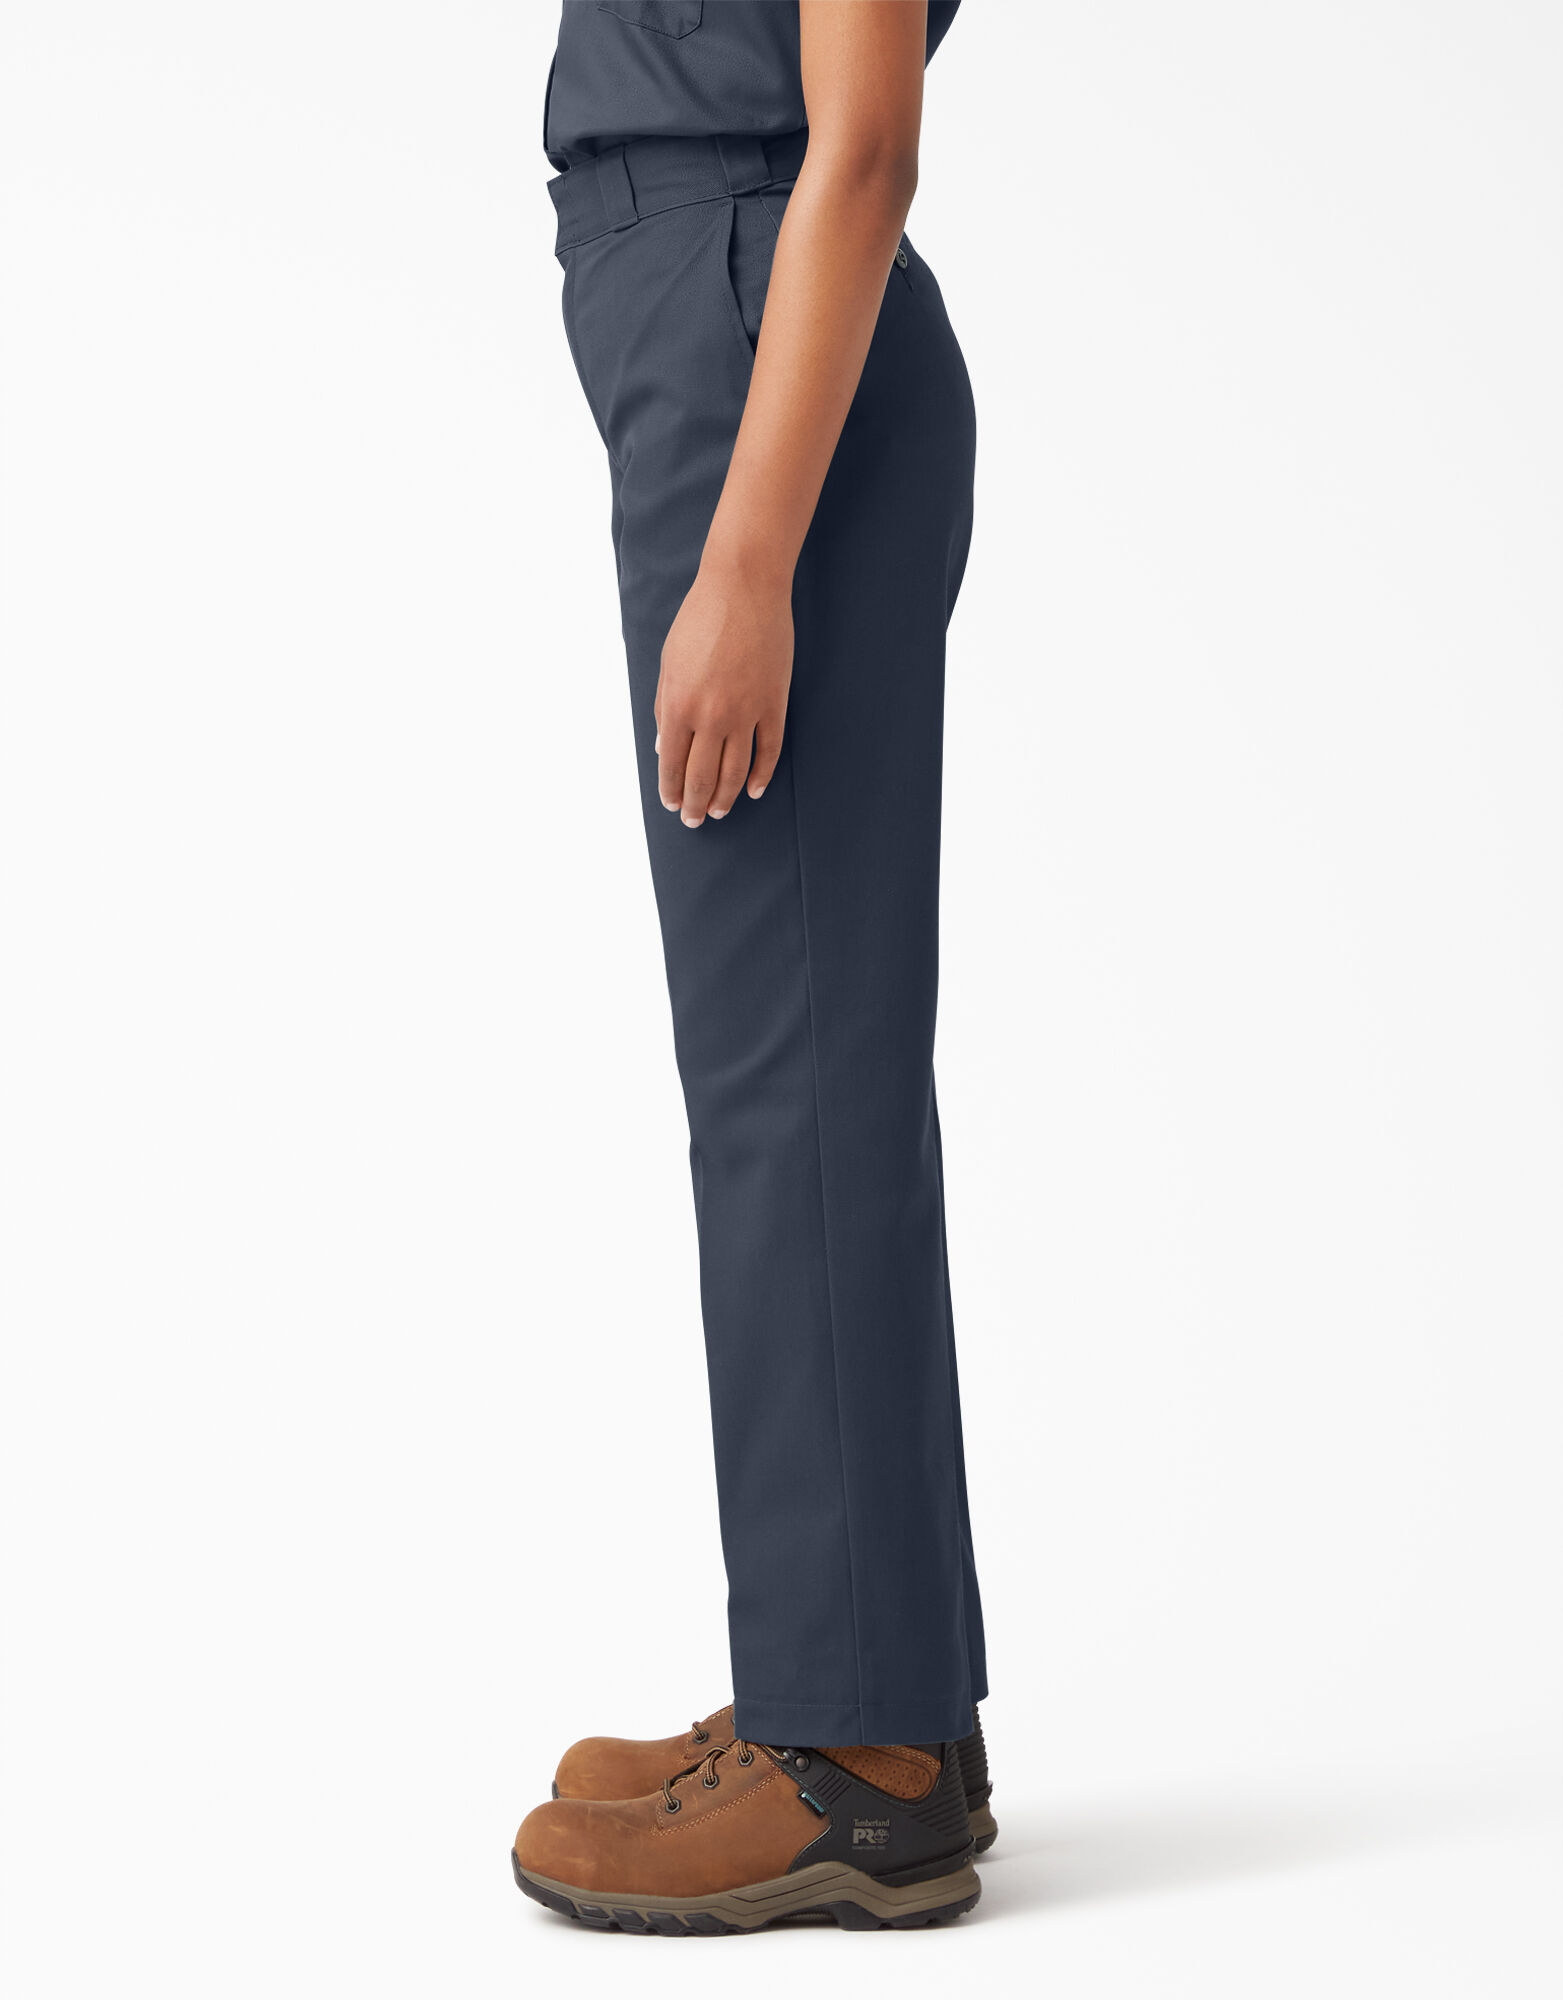 Dickies Womens Original Work Pant with Wrinkle And Stain Resistance